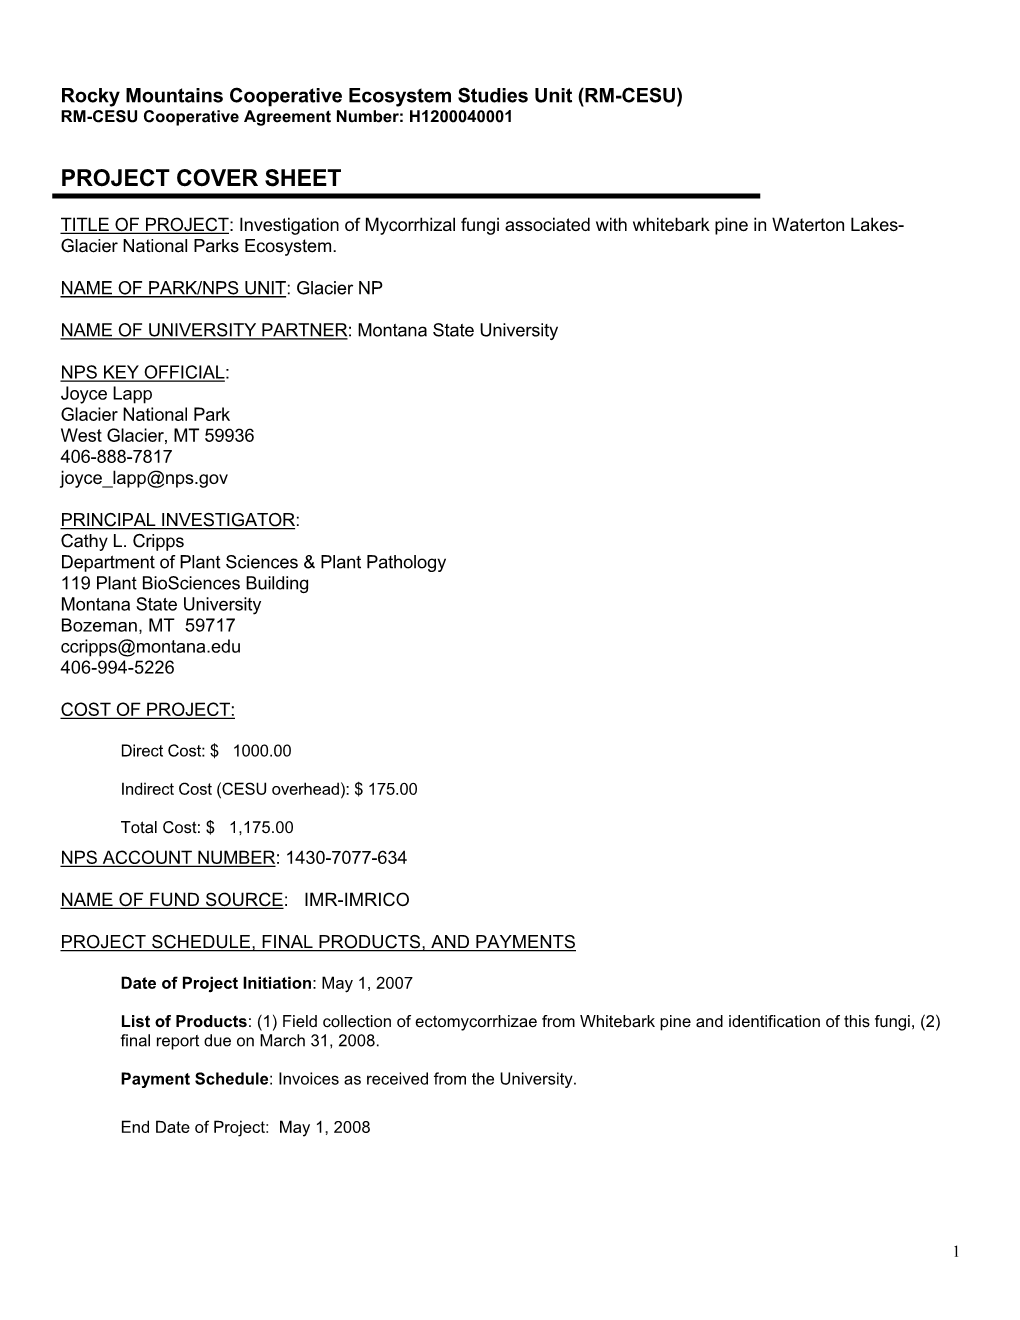 Project Cover Sheet